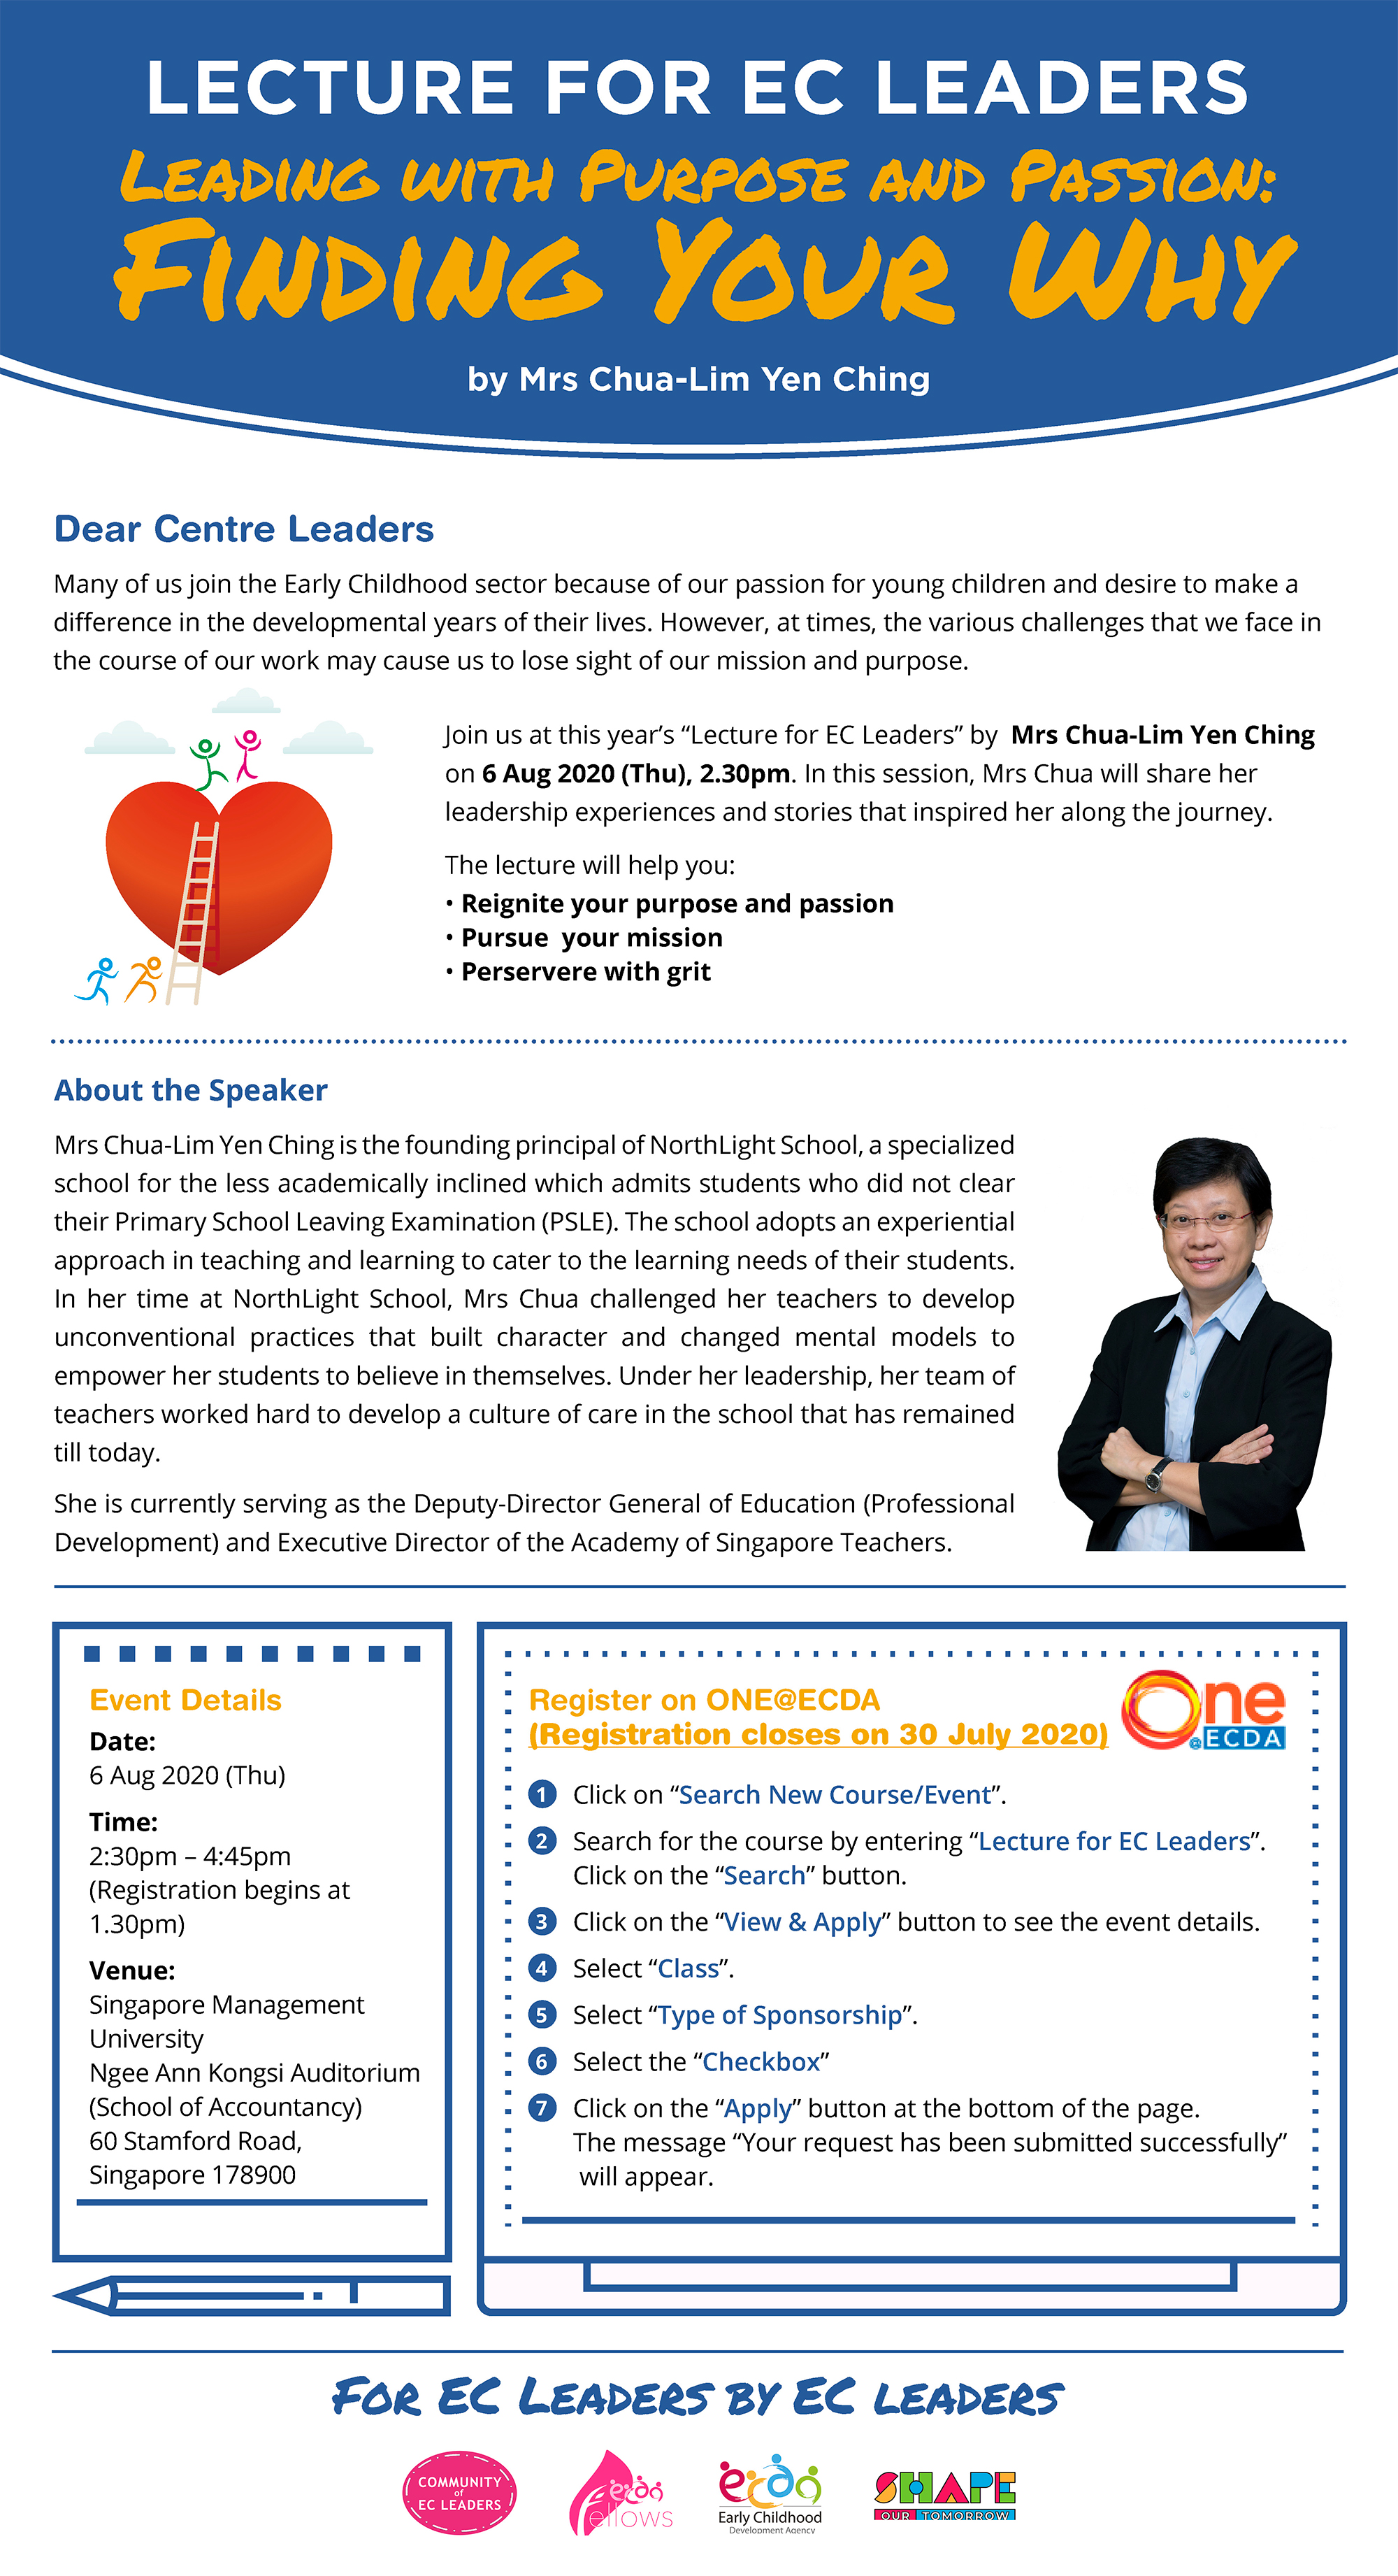 Lecture for EC Leaders – Leading with Purpose and Passion: Finding Your Way by Mrs Chua-Lim Yen Ching